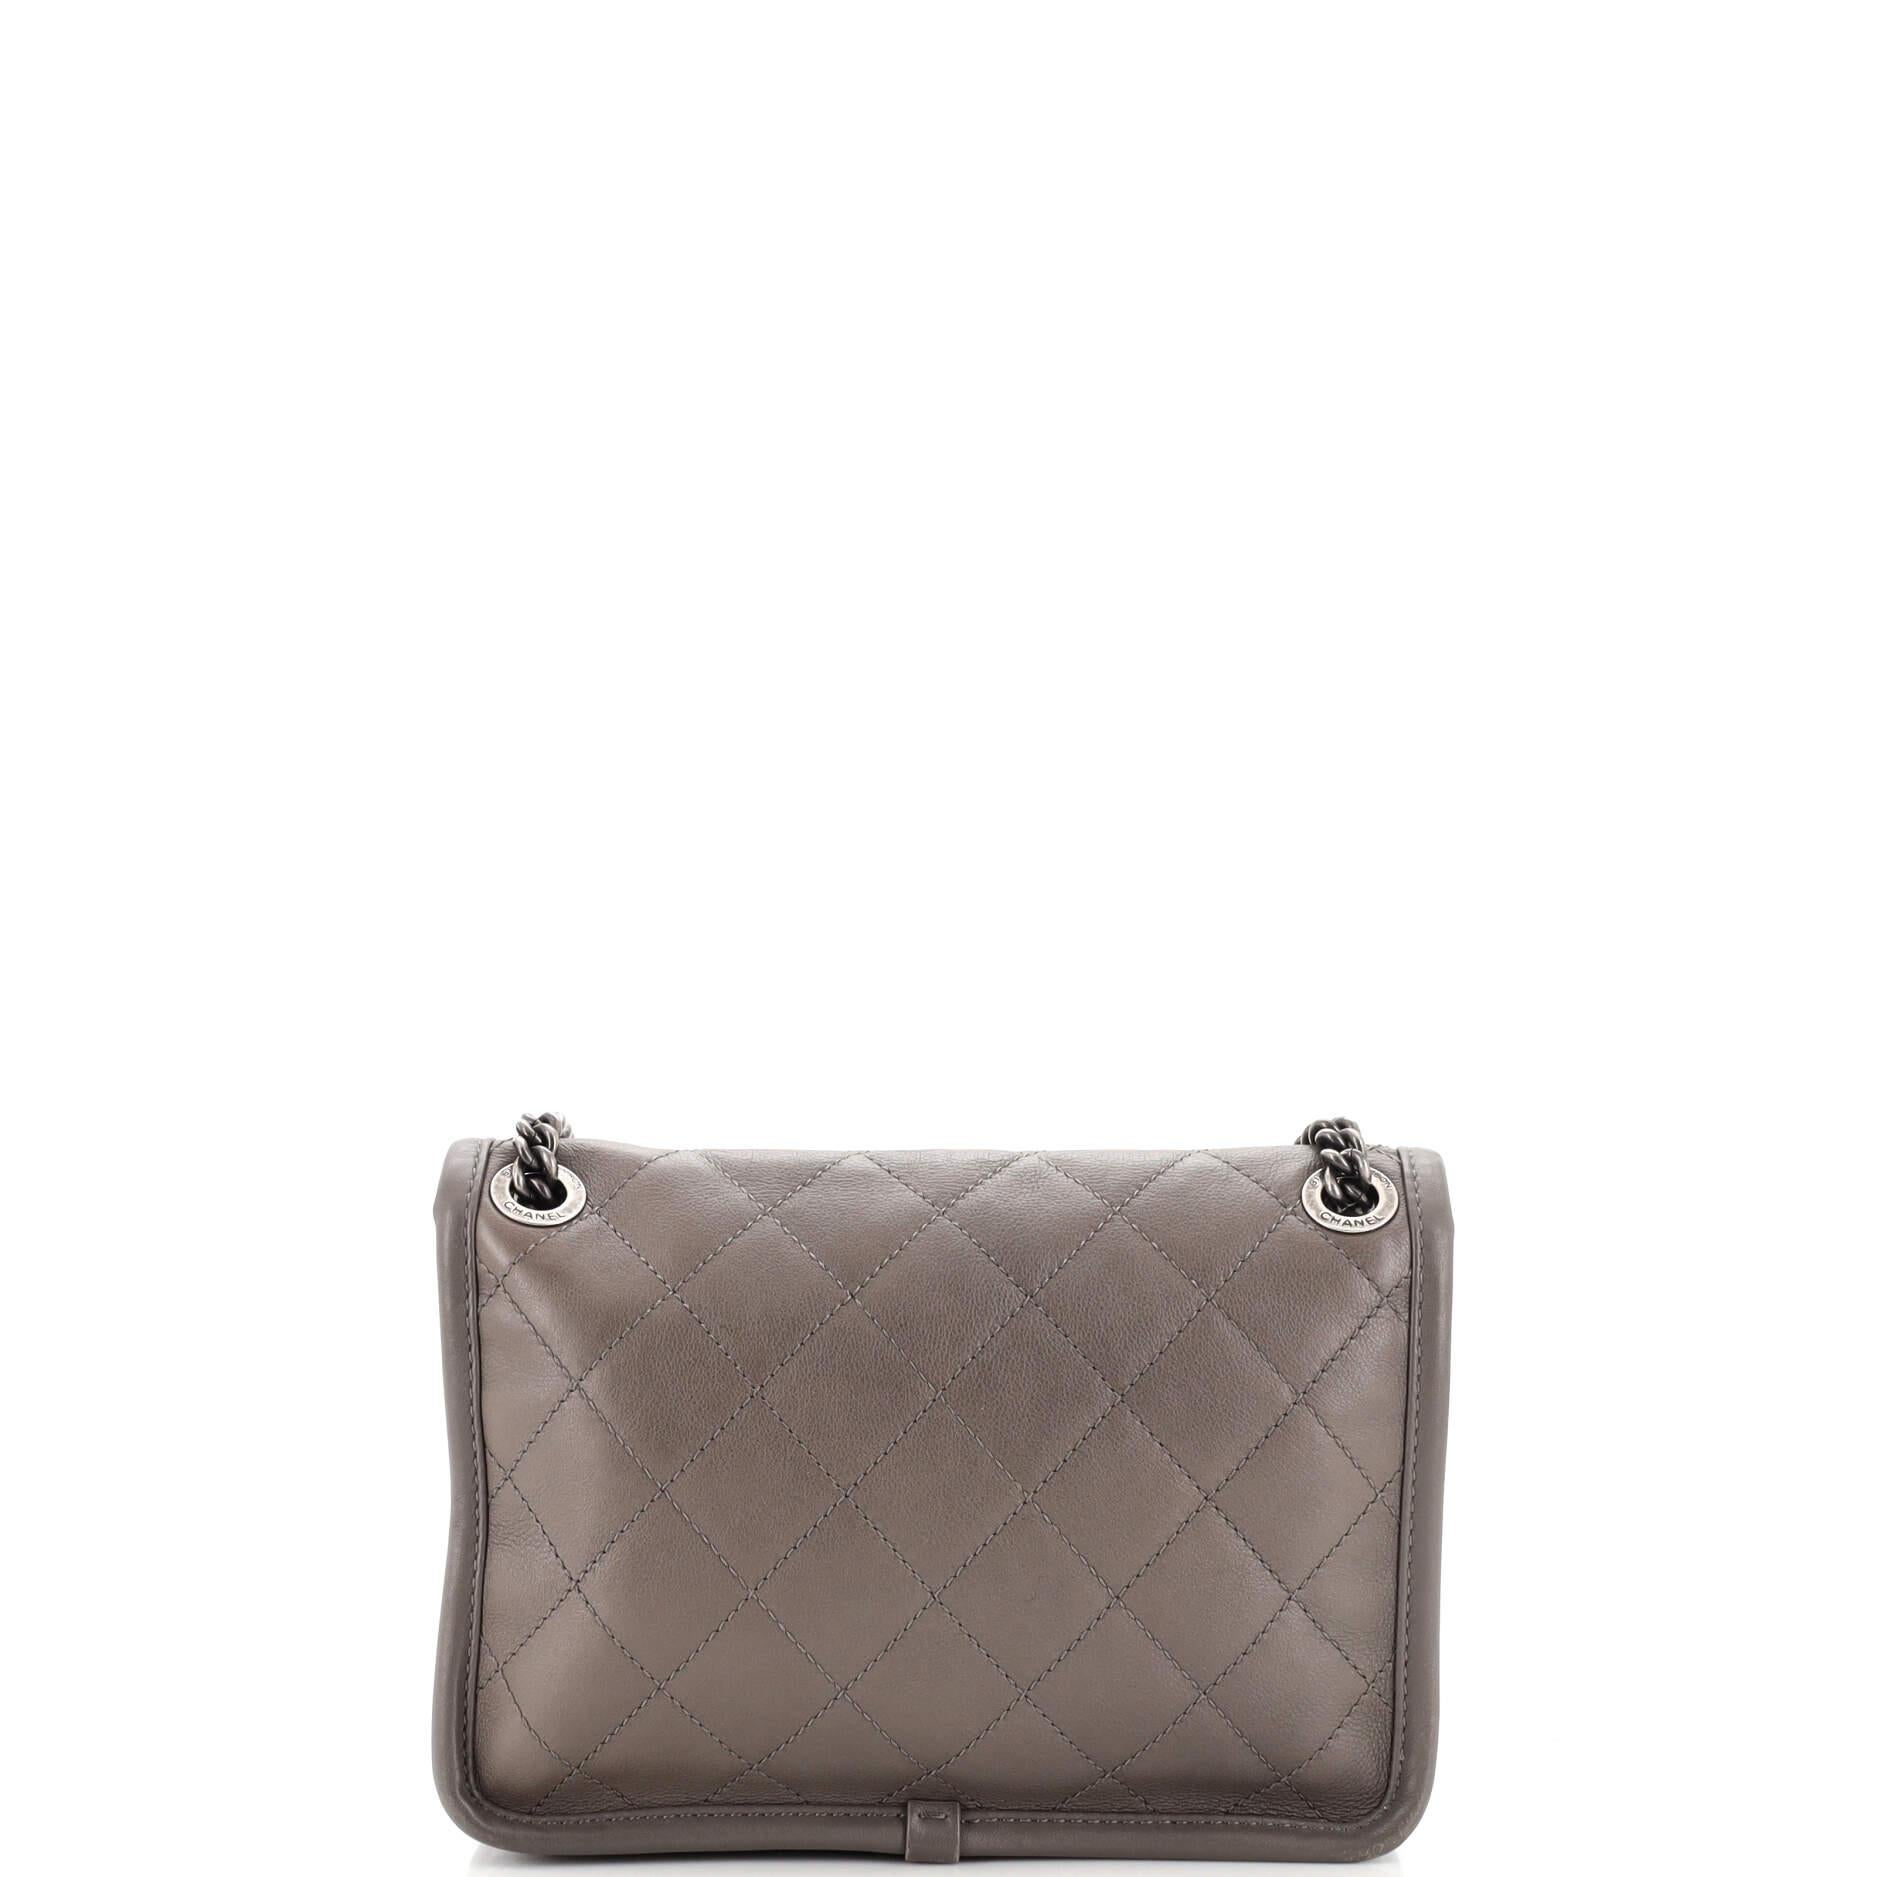 Women's Chanel French Riviera Flap Bag Quilted Calfskin Mini